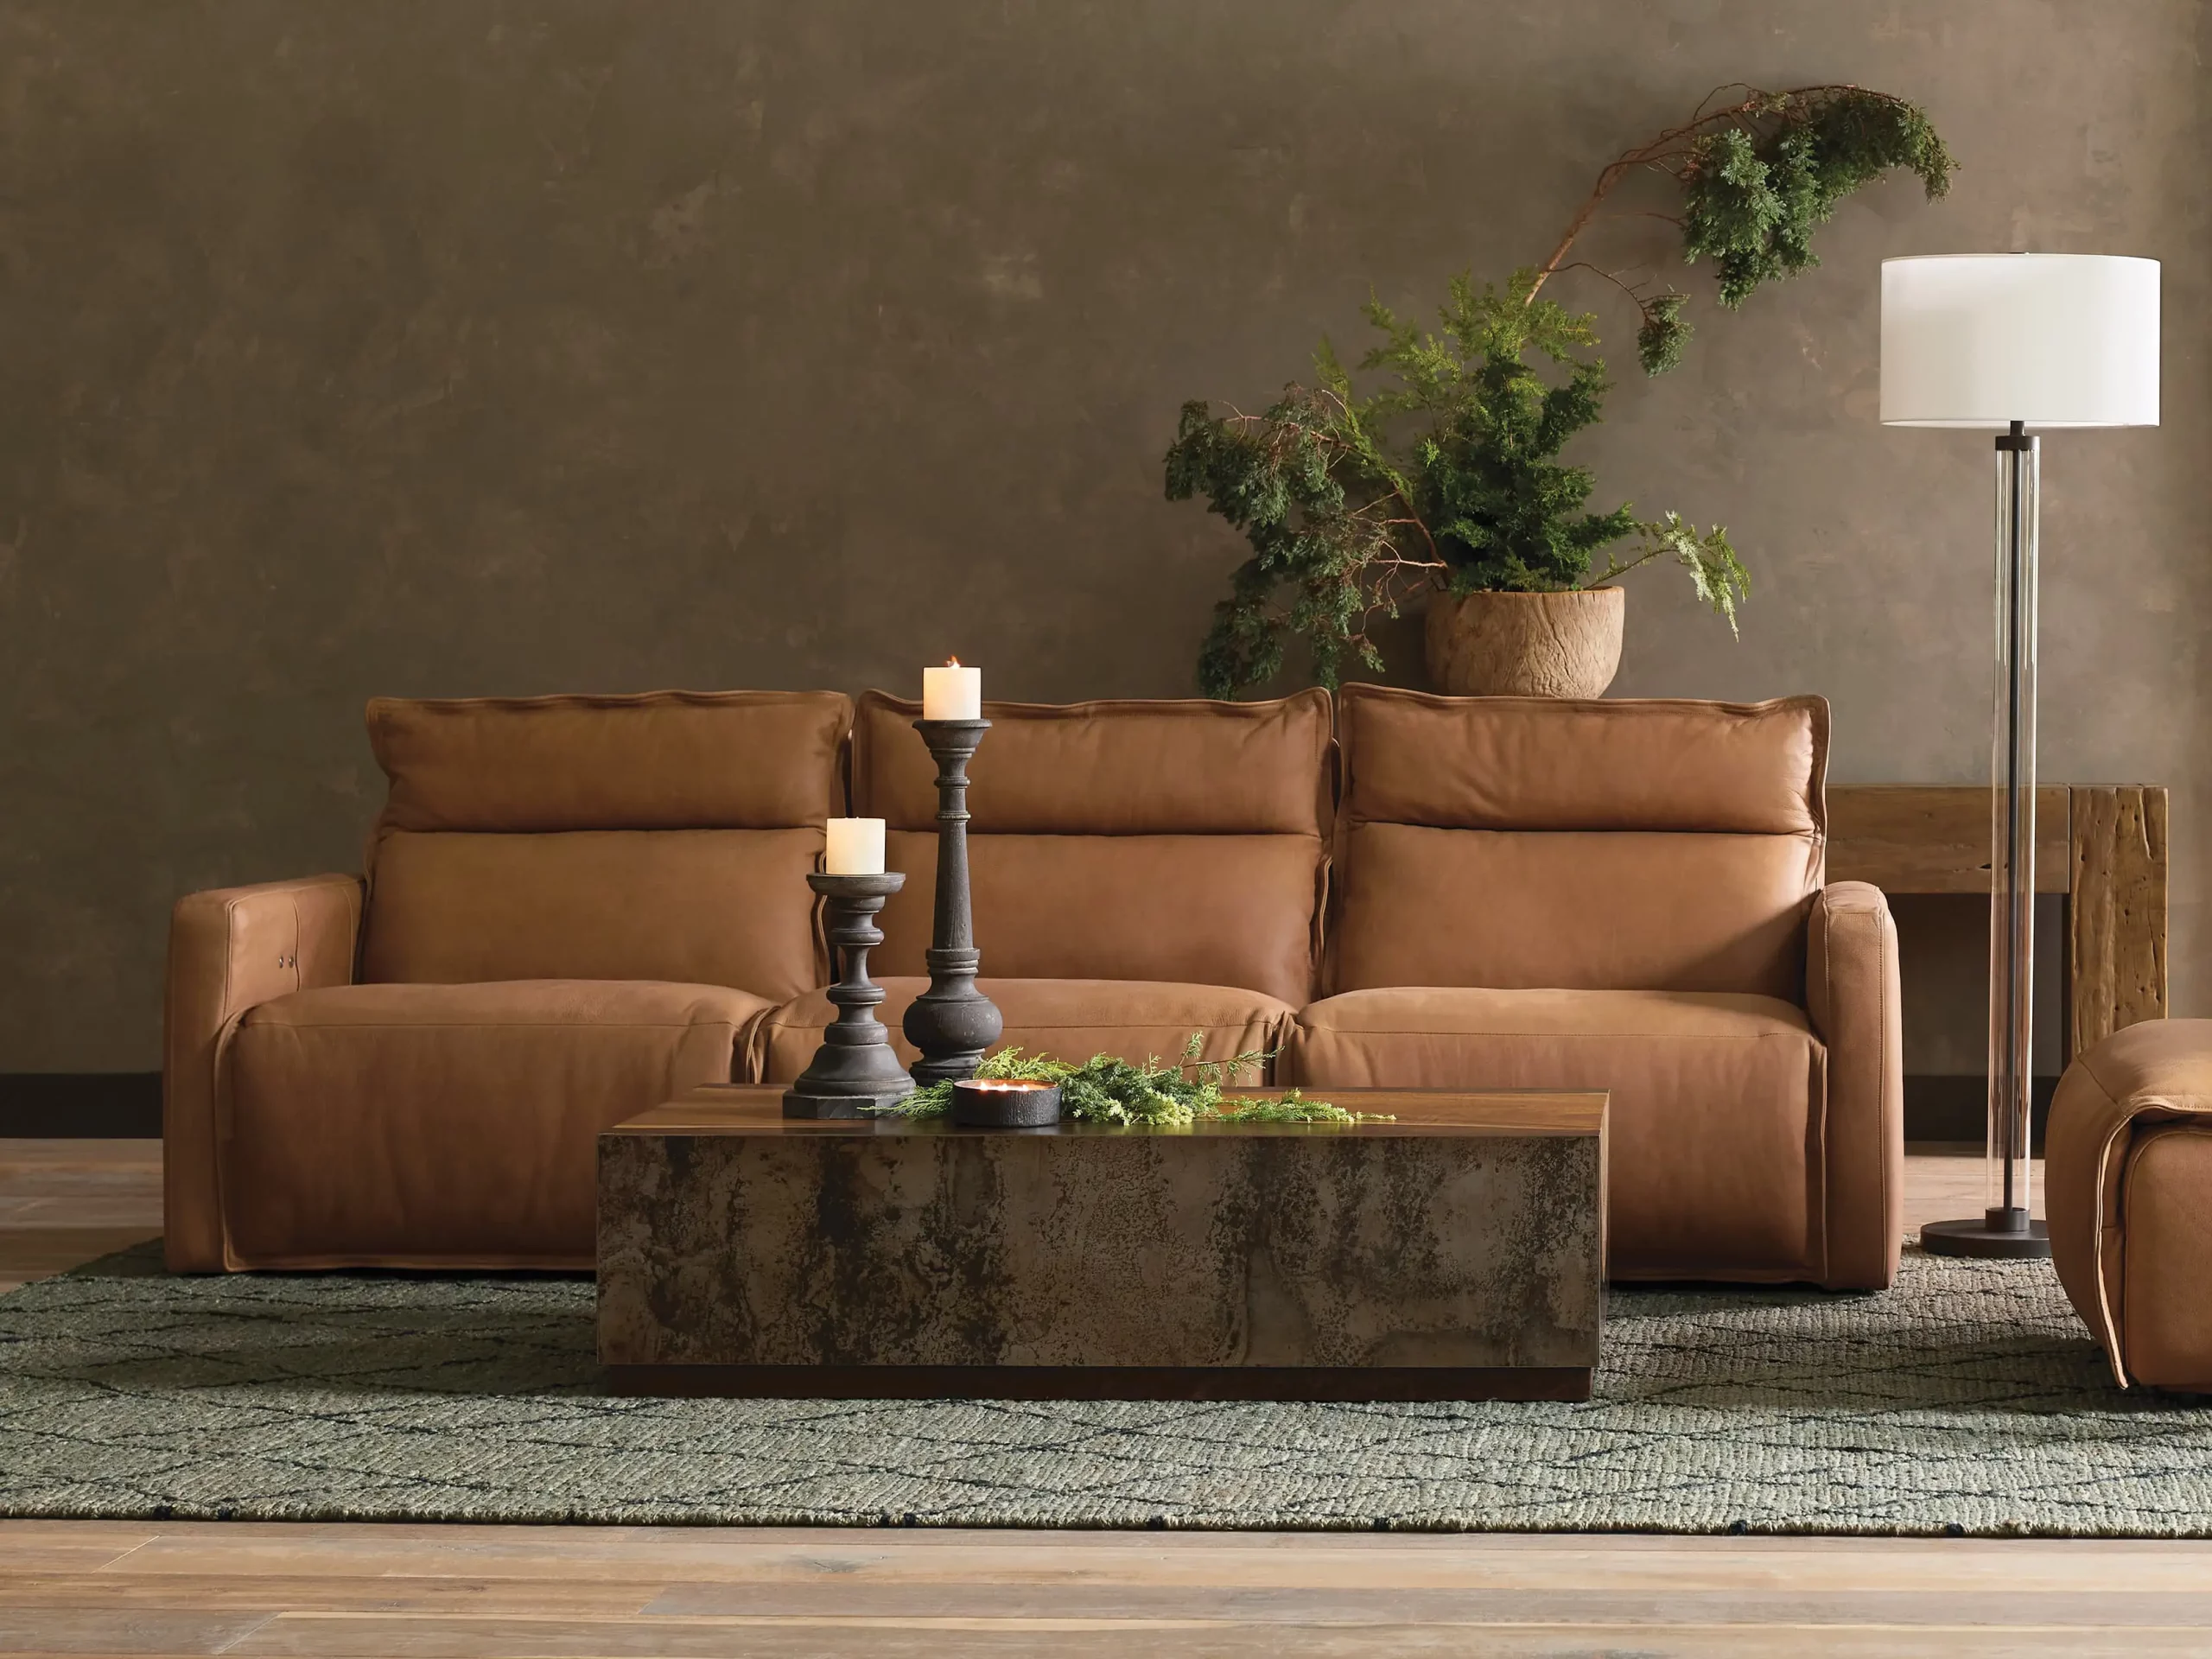 Arhaus Sofas Manufactring: How are They Connected?